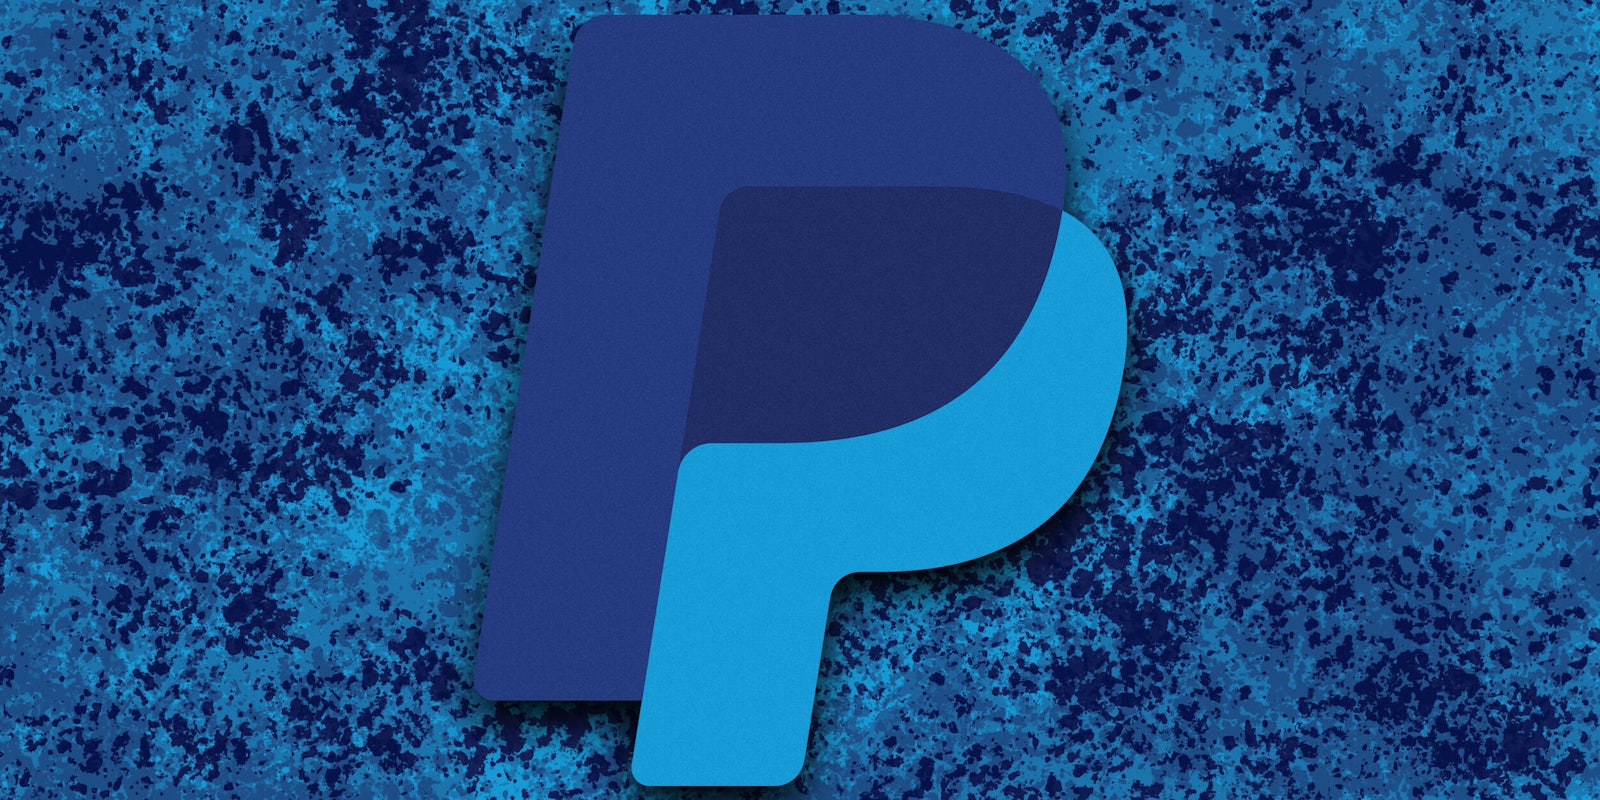 is paypal safe? PayPal logo over spatter background